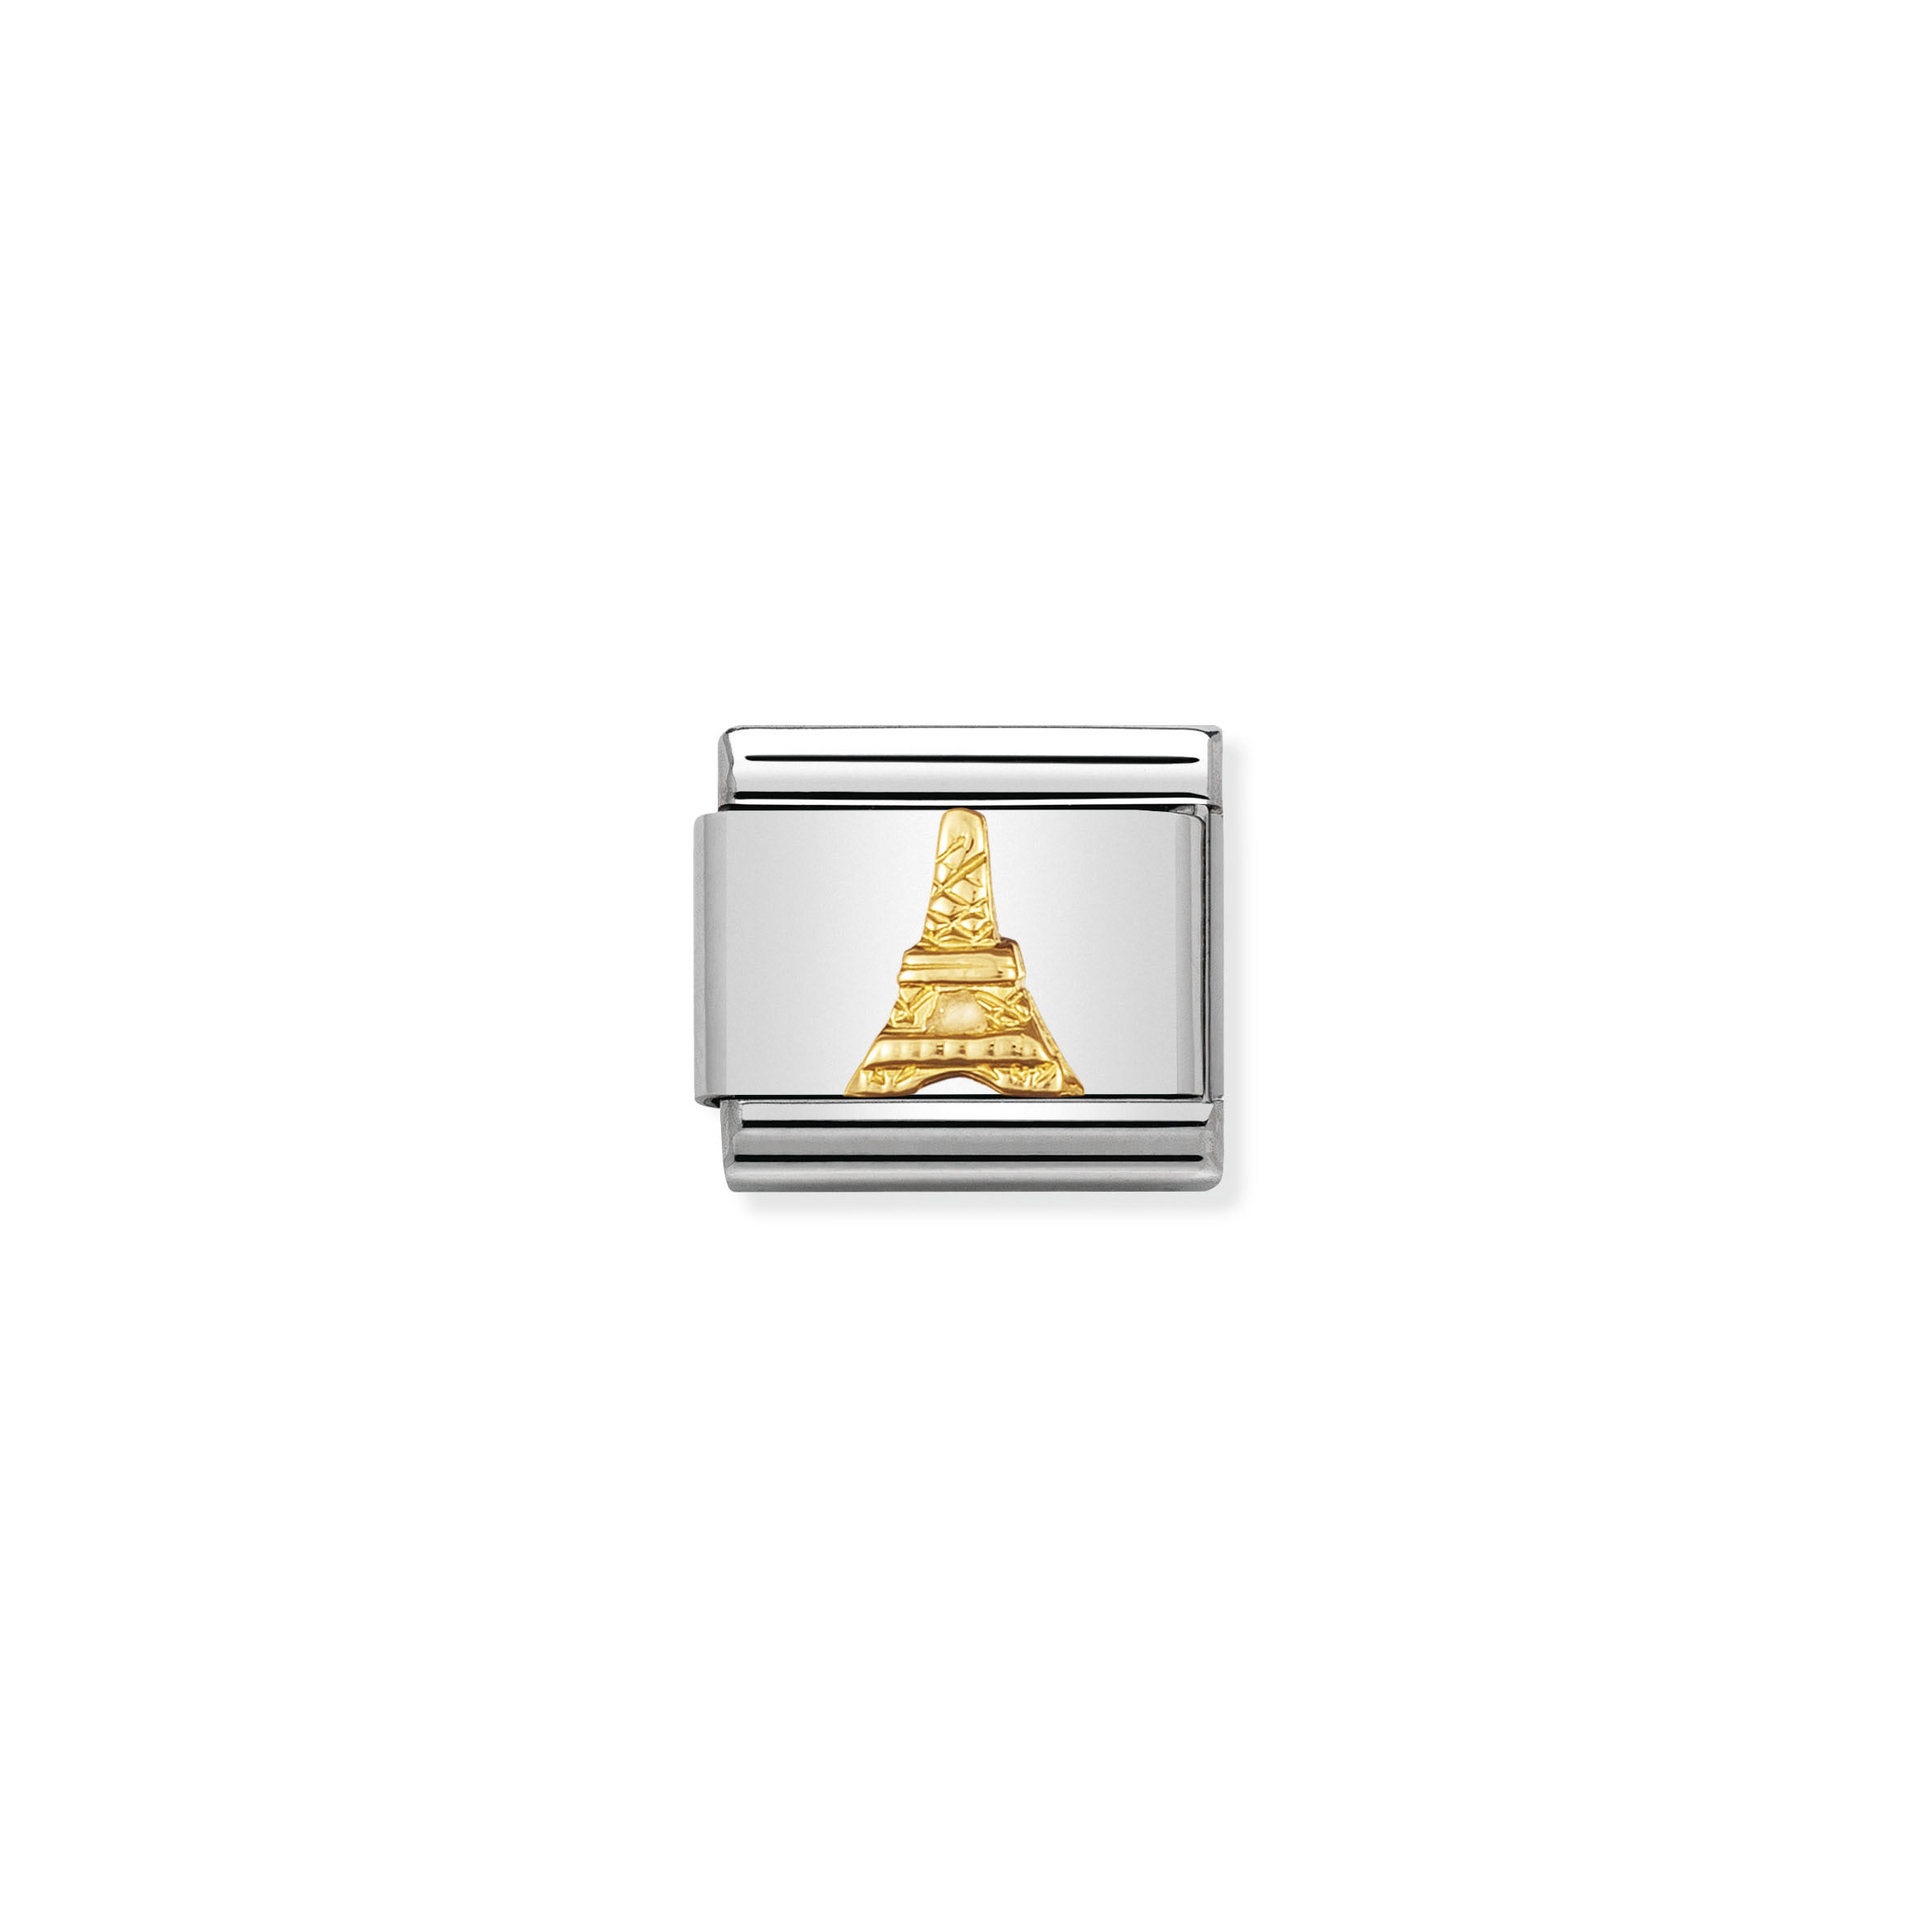 NOMINATION COMPOSABLE Classic RELIEF MONUMETS in stainless steel with 18k gold Eiffel Tower 030123_15